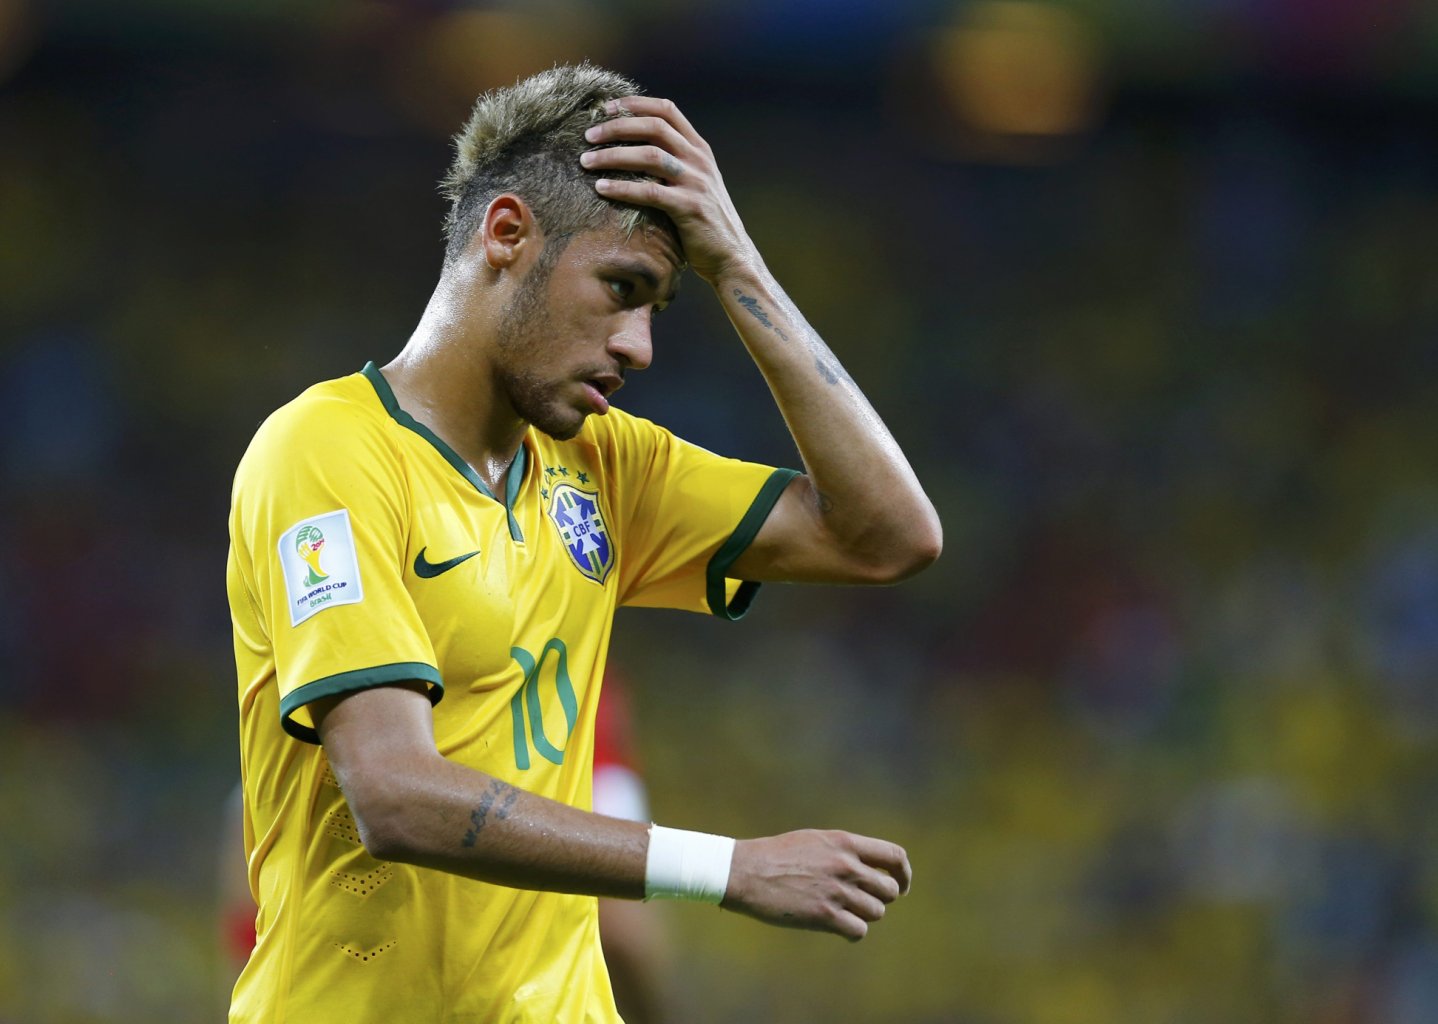 Neymar and Brazil's disappointing end to another World Cup